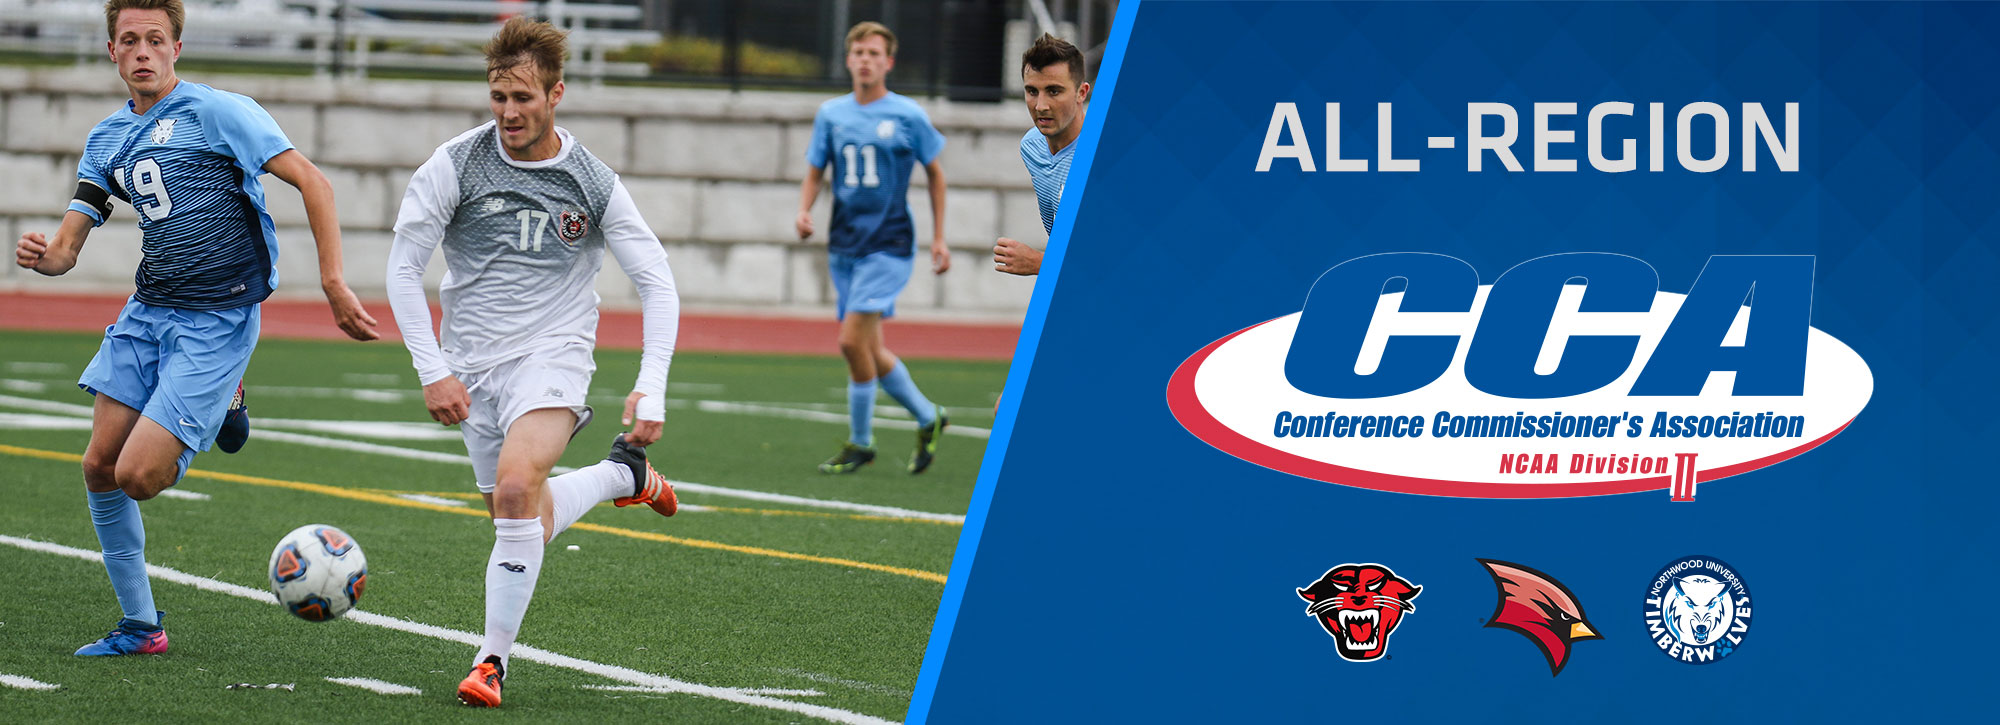 Davenport's Shrimpton Selected D2CCA Men's Soccer Midwest Region Player of the Year; Six Honored